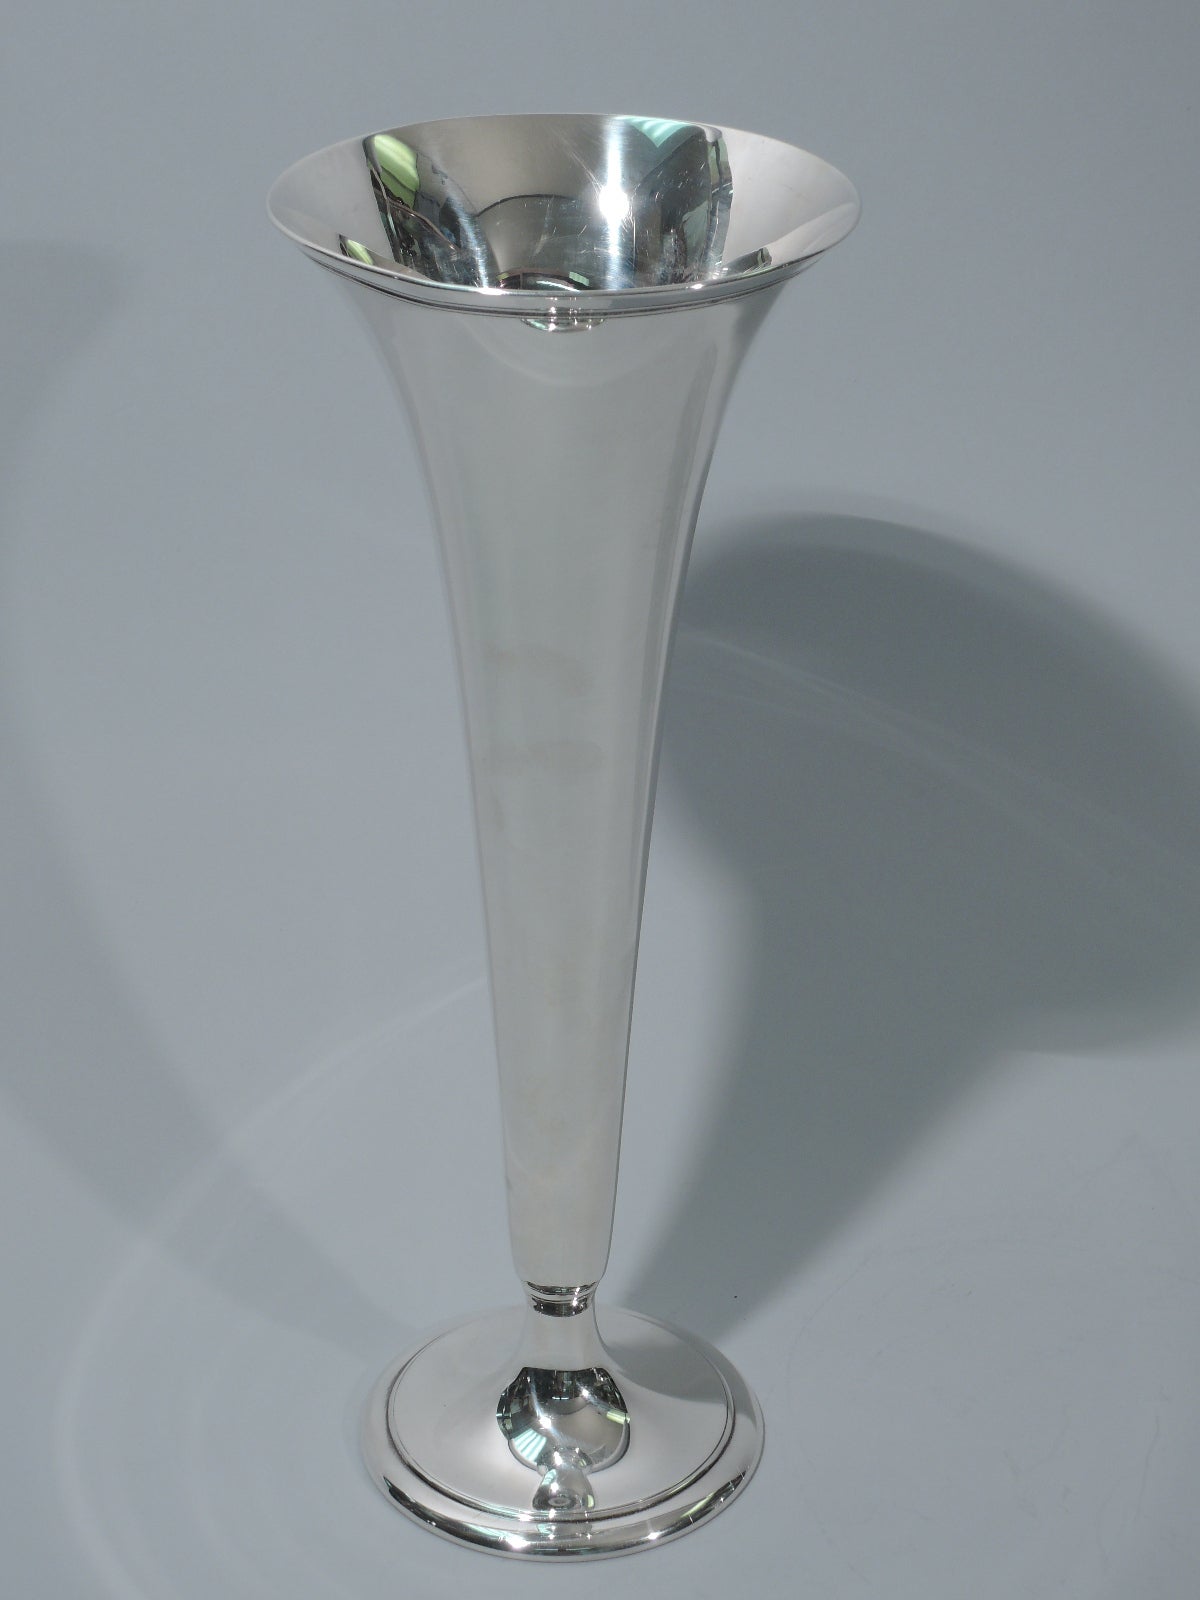 Sterling silver trumpet vase. Made by Tiffany & Co. in New York, ca. 1913. Flared rim and stepped and raised foot. Molded band near rim. Suggestion of knop at base. Subtle. The pattern (no. 18594) was first produced in 1913. Hallmarked. Excellent